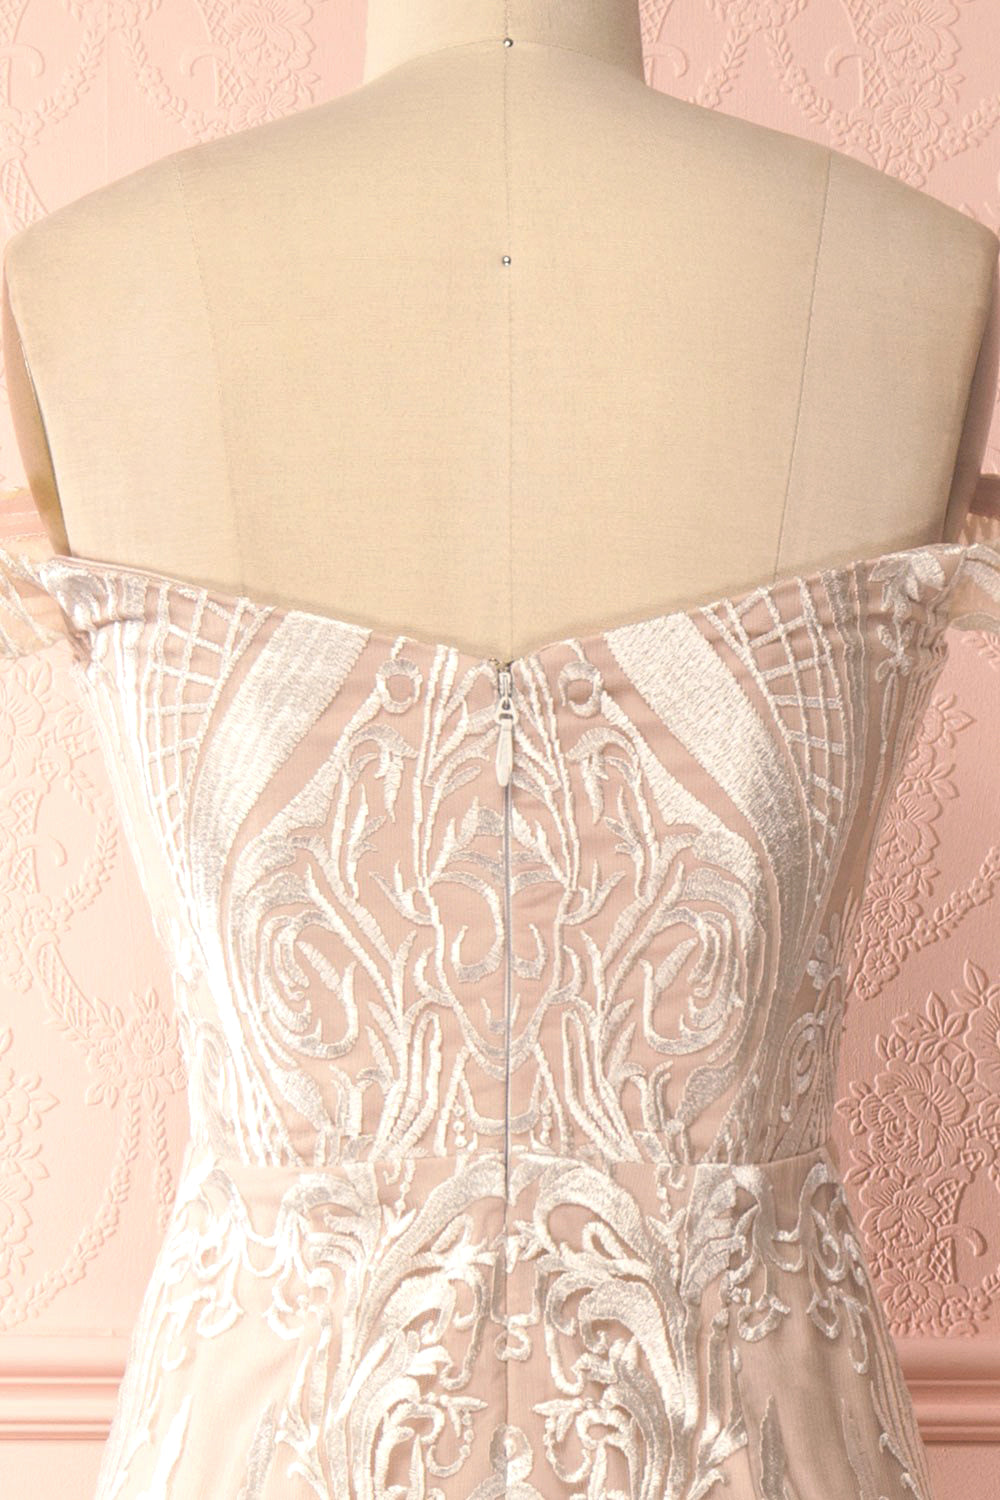 Mouna Pur Beige Embroidered Off-Shoulder Mermaid Gown | Boudoir 1861 back close-up